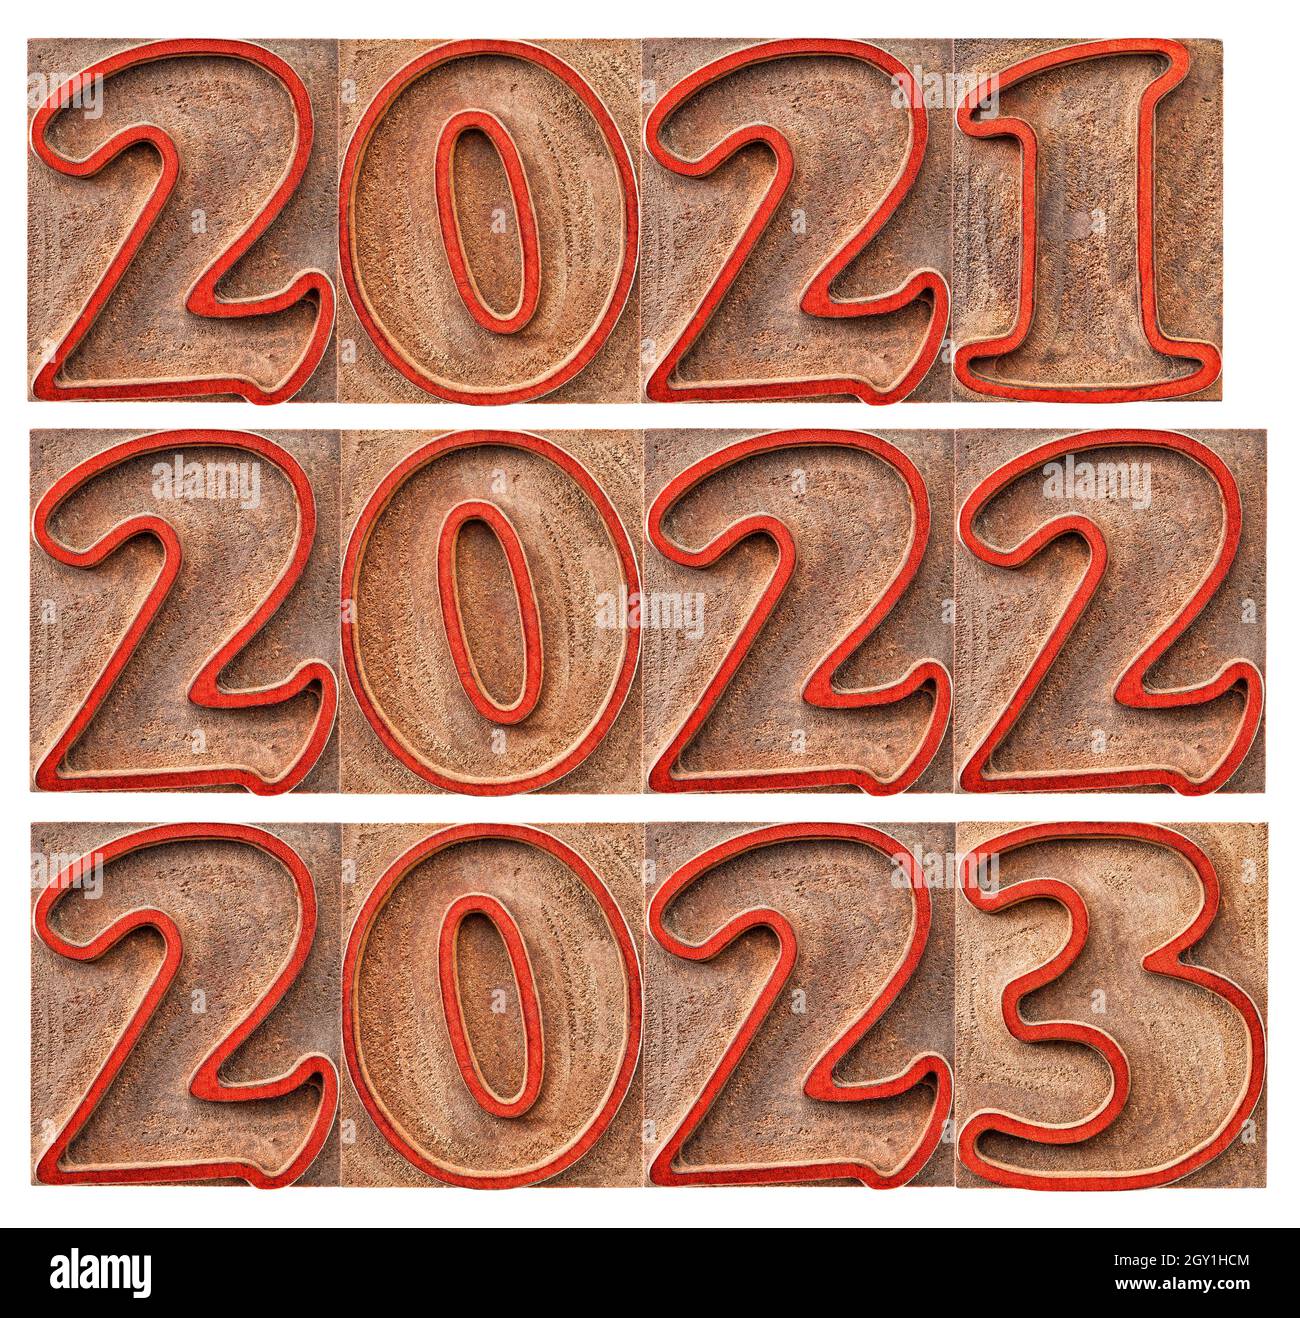 passing and incoming years (2021, 2022, 2023) in letterpress wood type block, stained by red inks, isolated on white Stock Photo